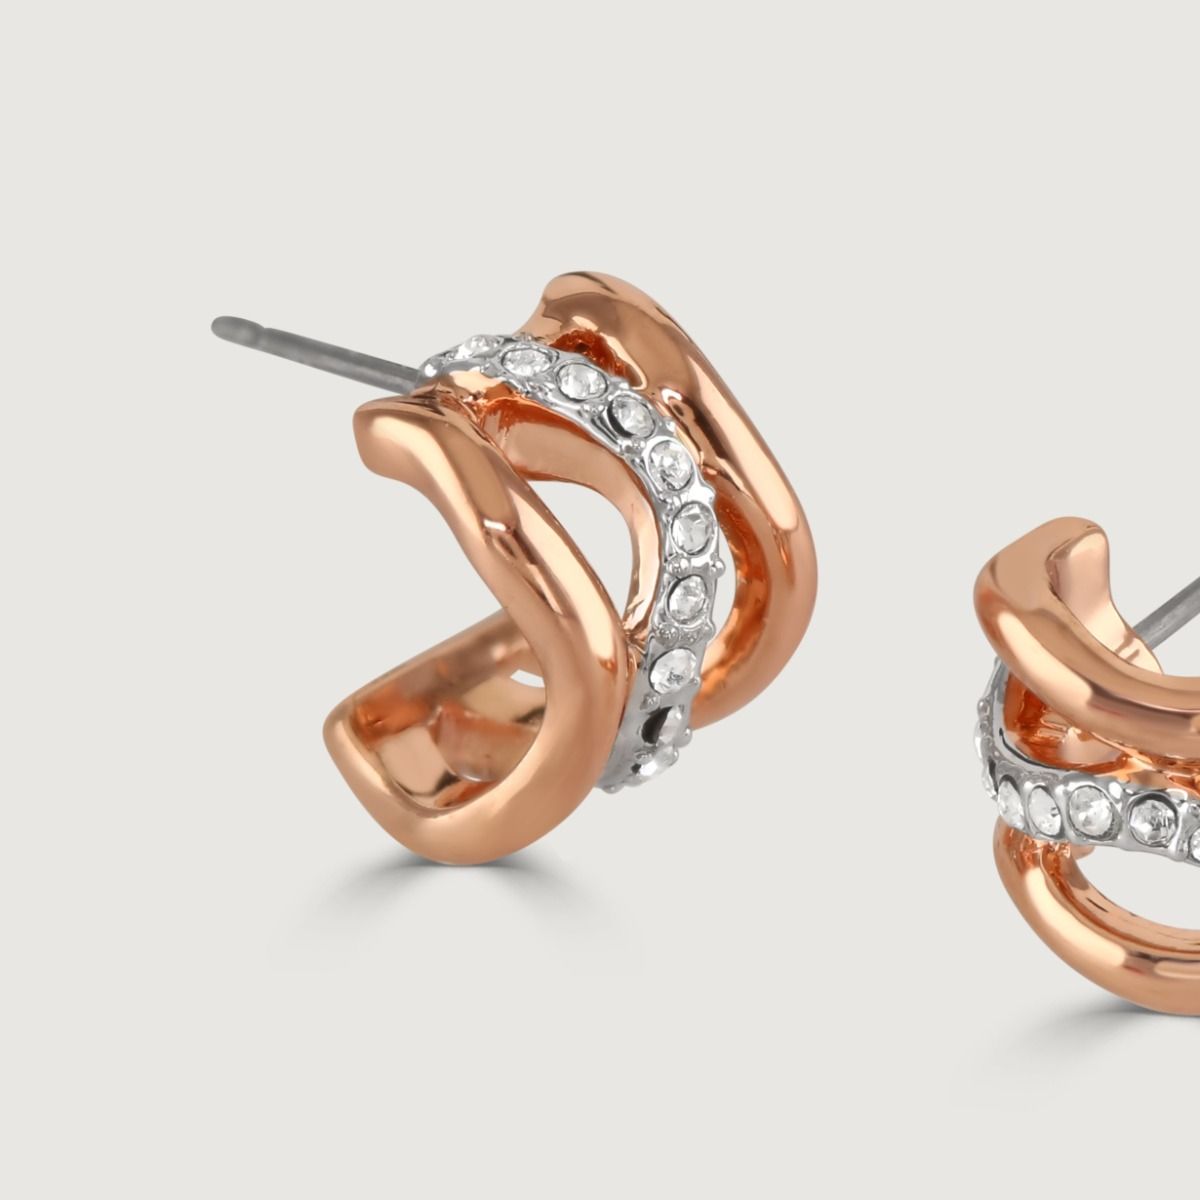 Modern and luxurious, the Bayswater half-hoop earrings are designed with soft swirls of champagne rose gold and rhodium-plated bands finished with subtle white crystal details. 